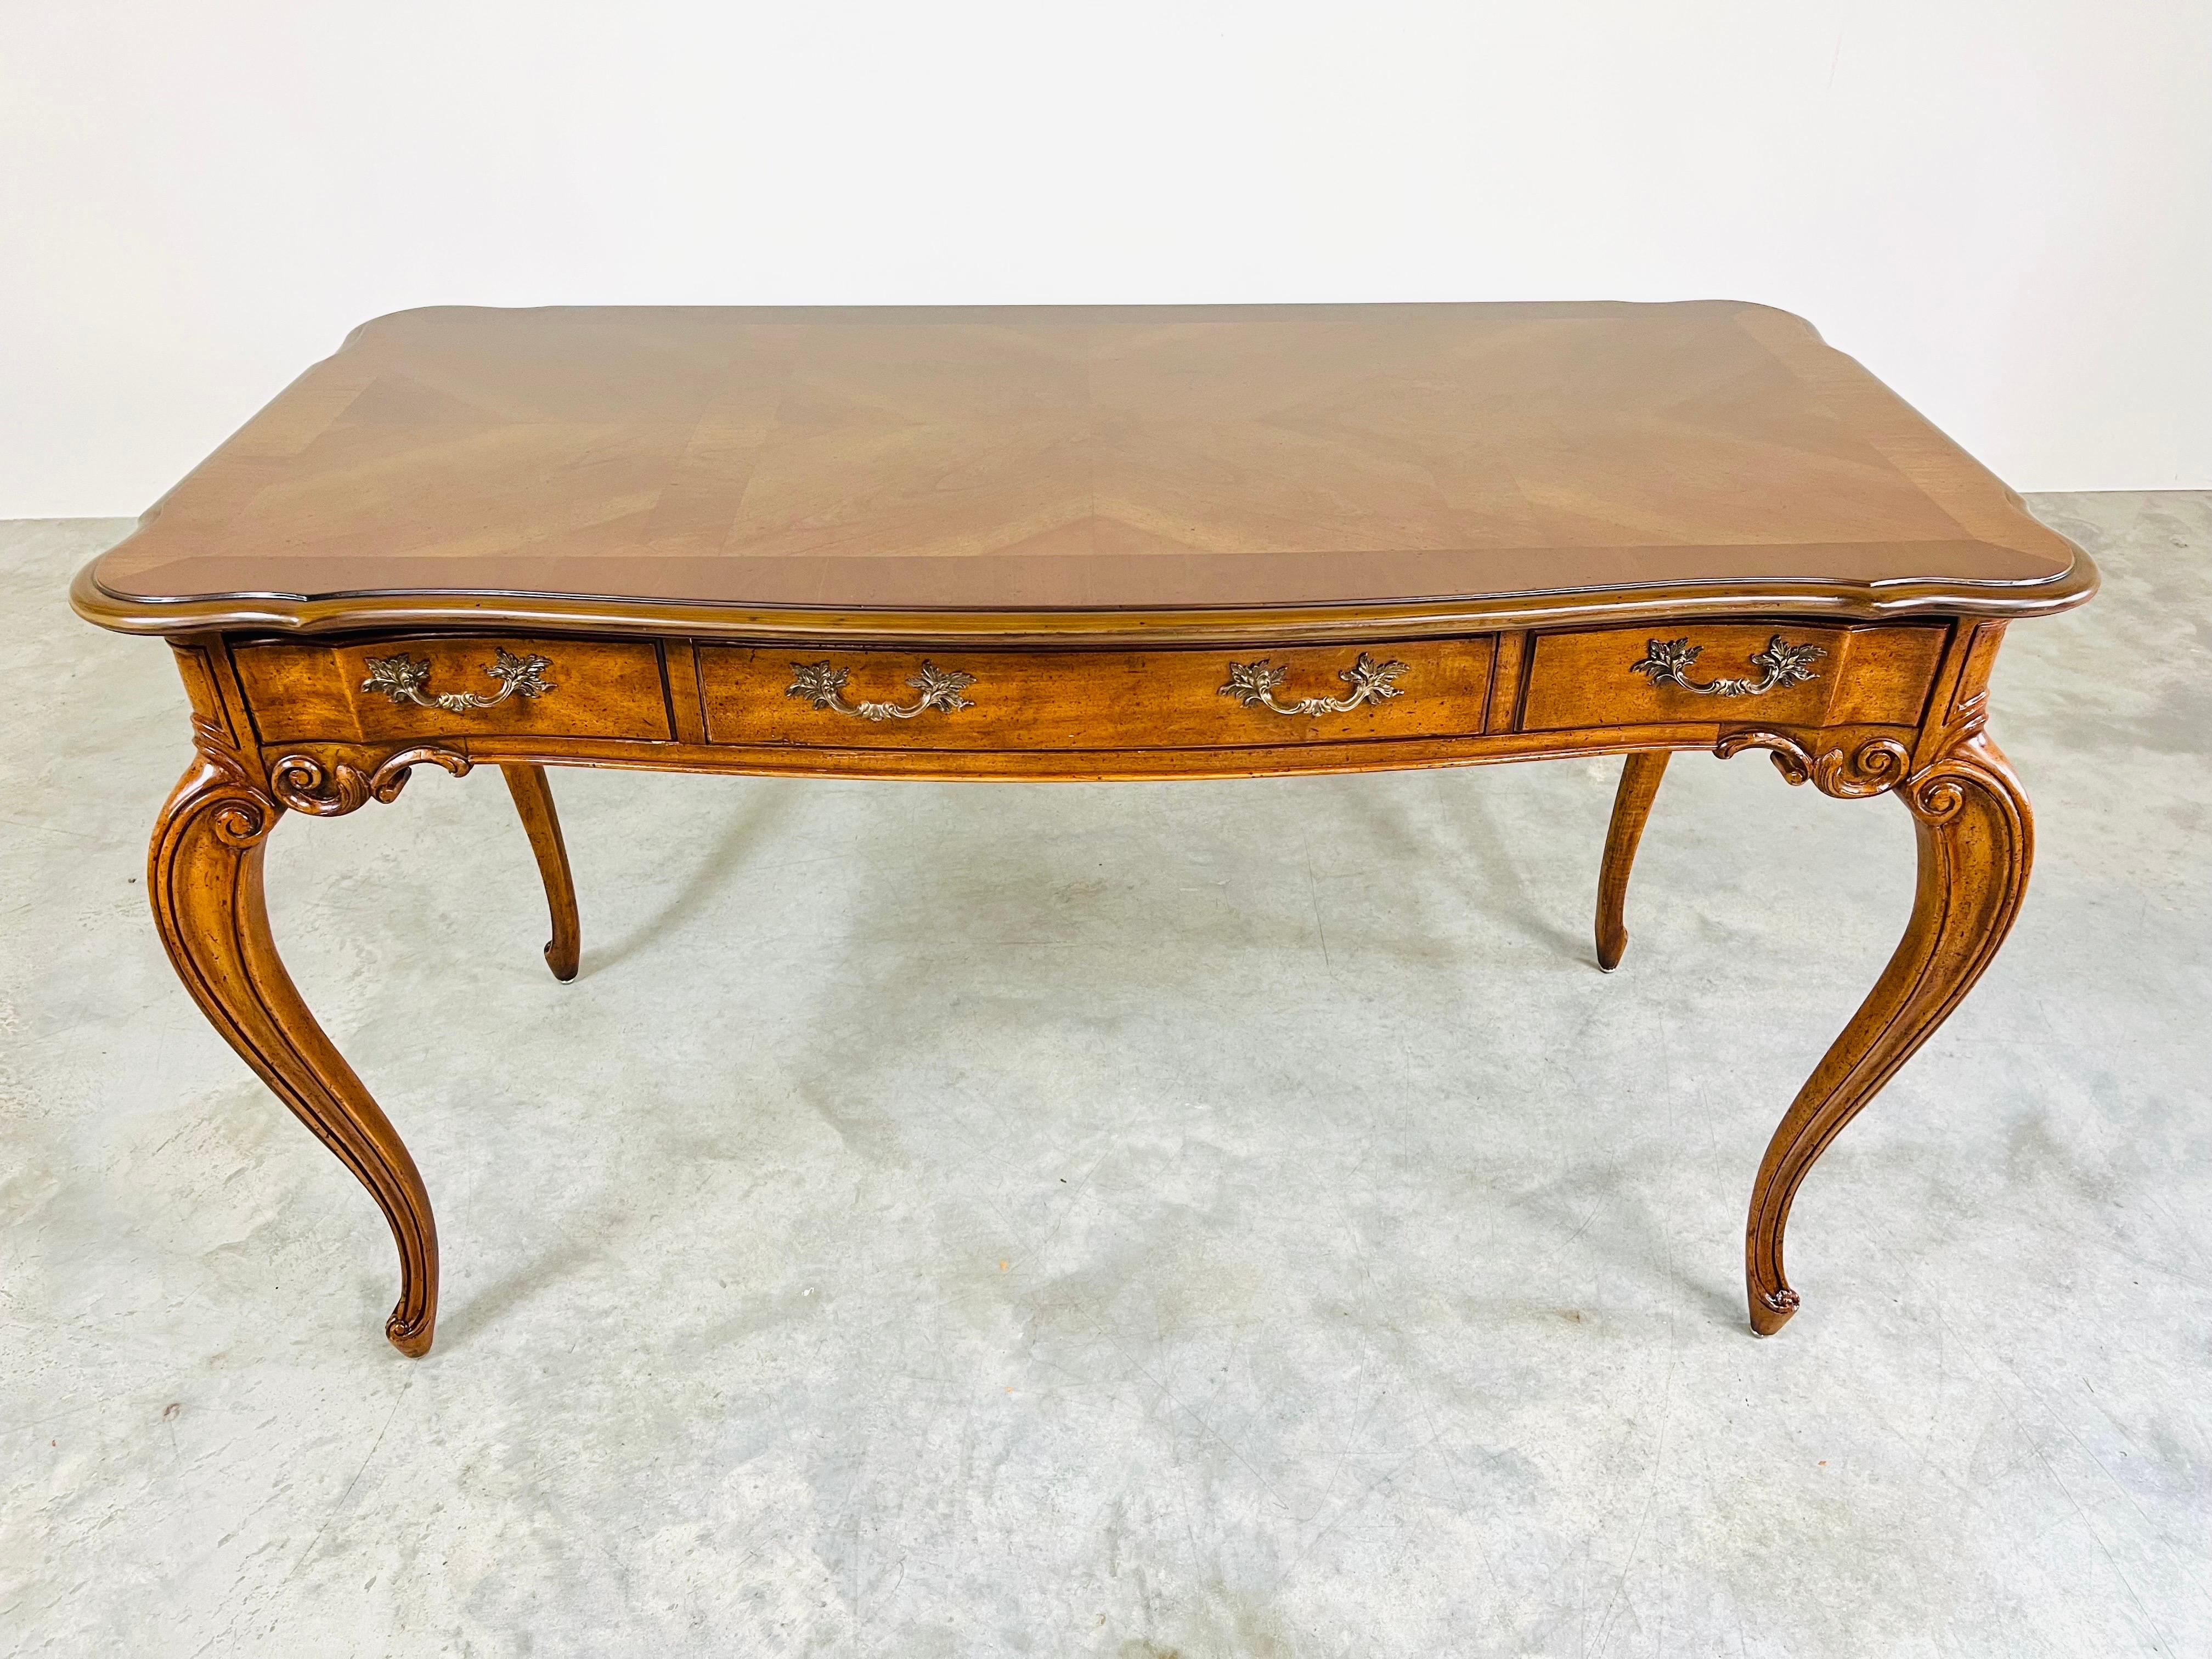 Walnut Louis XV style desk having stunning lines with hand carved accents throughout and detailed brass pulls. An elegant addition to the space that it is placed in. 
Excellent condition. Solid, clean and ready for use! 
30x52x26” HWD Seated leg